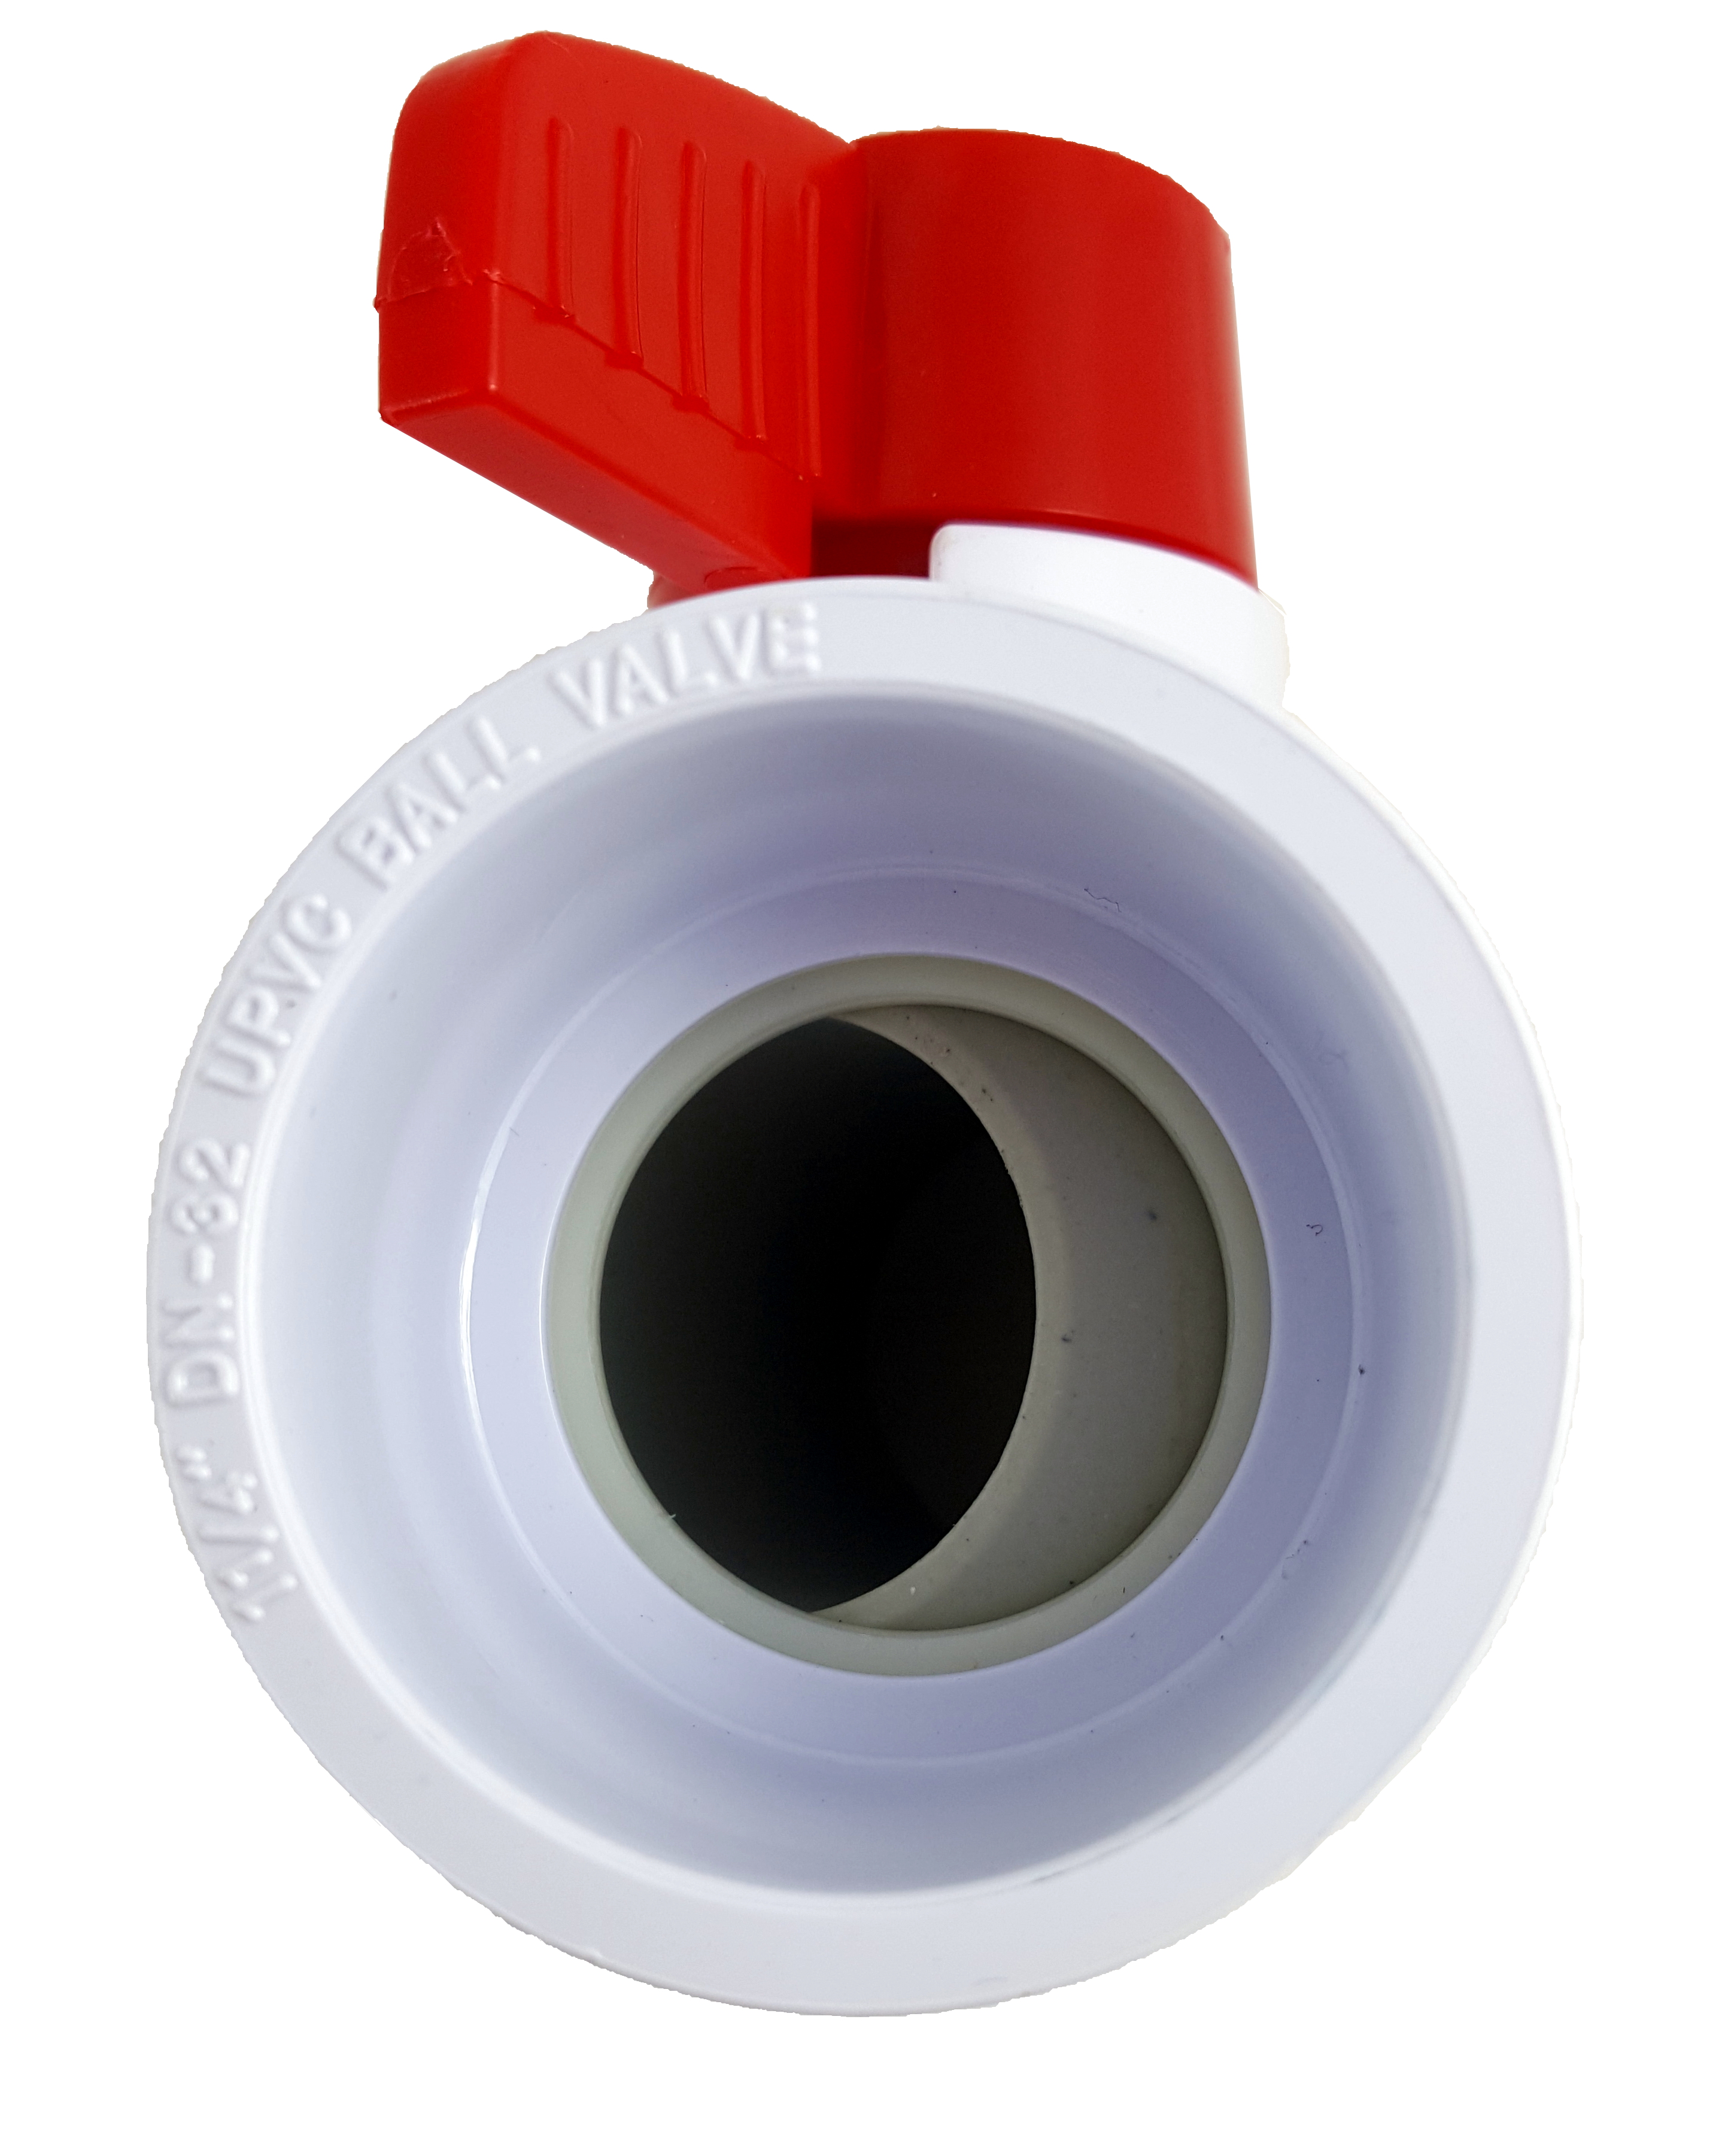 PVC COMPACT BALL VALVE 1-1/4" - Socket - Sanipro - (Pack of 6) - image 2 of 3